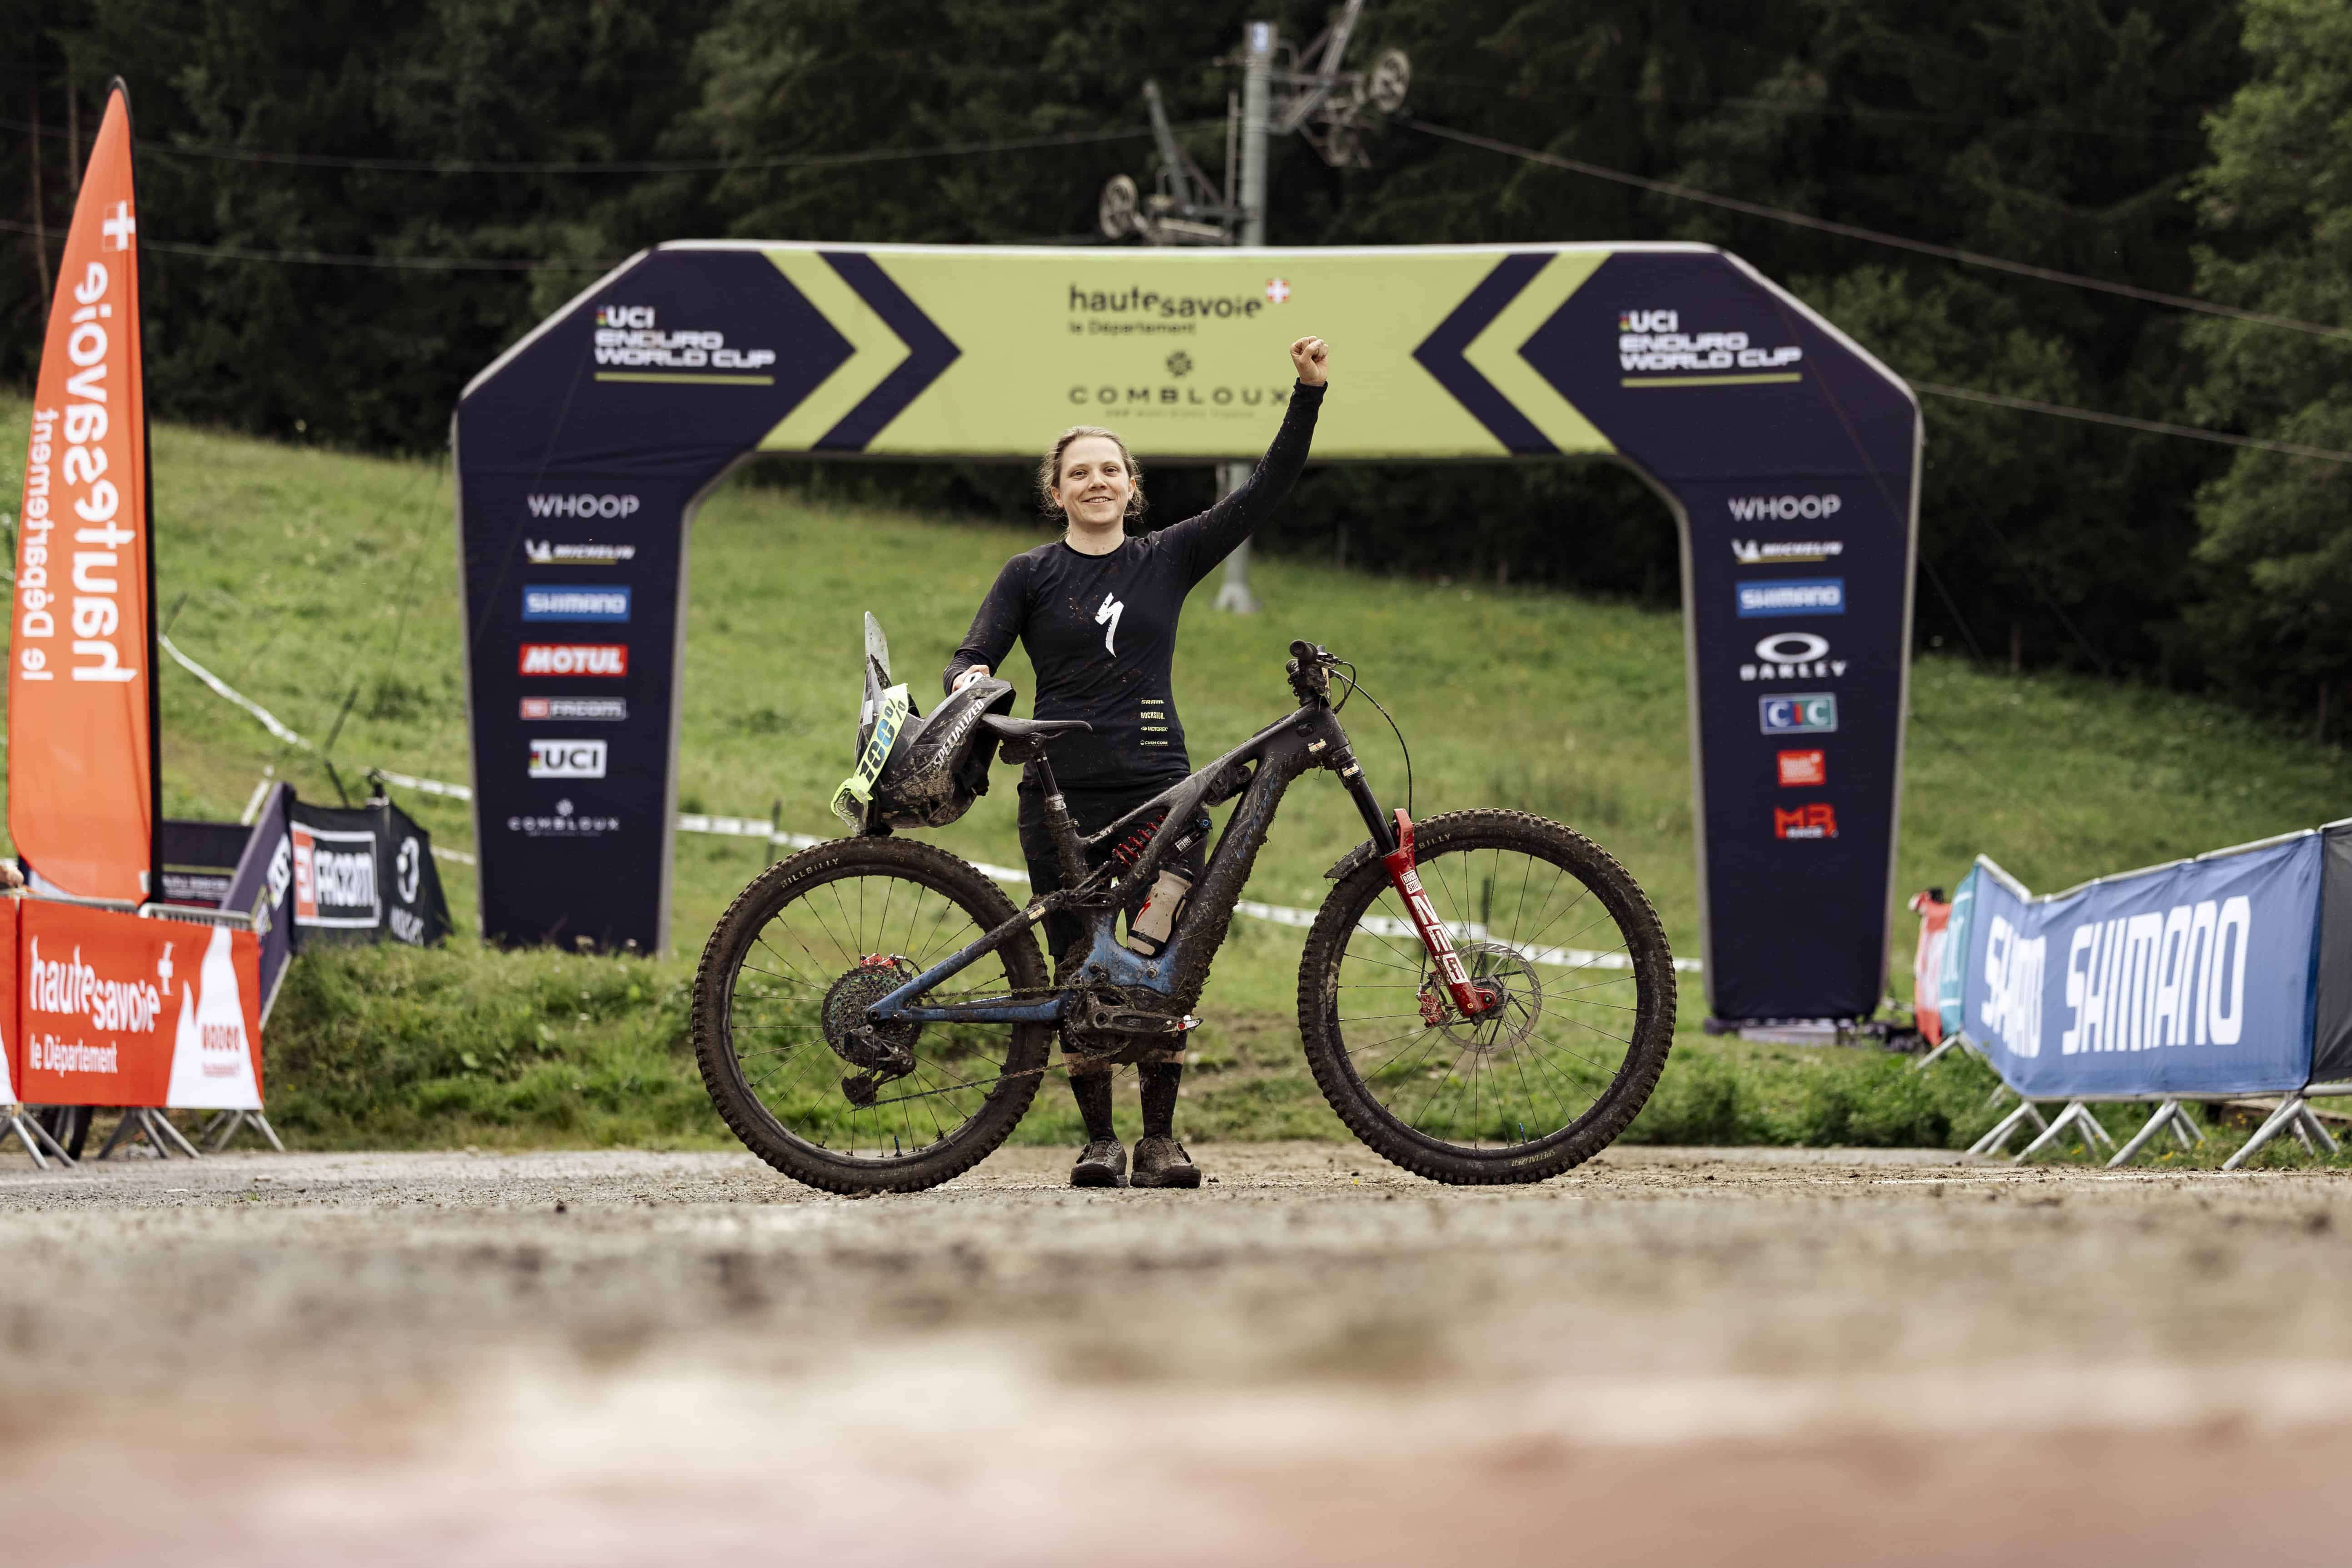 CHARLES AND ROGGE TAKE HOME THEIR FIRST UCI E-ENDURO WORLD CUP WINS, IN COMBLOUX, HAUTE-SAVOIE 